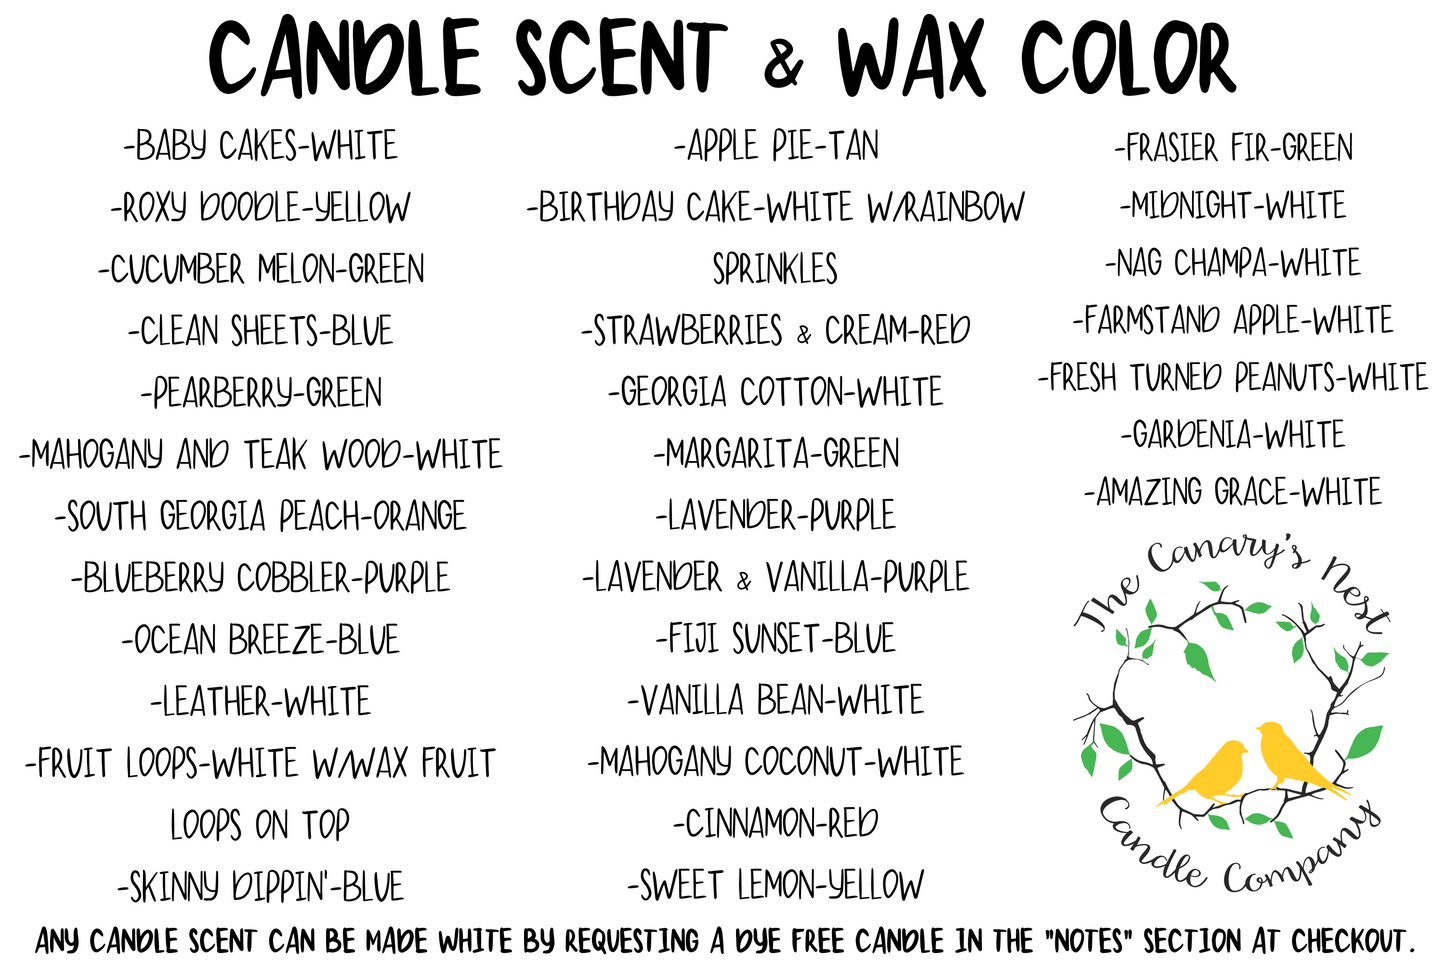 Happy Easter Candle, Soy Candle, Choose Your Scent/Size